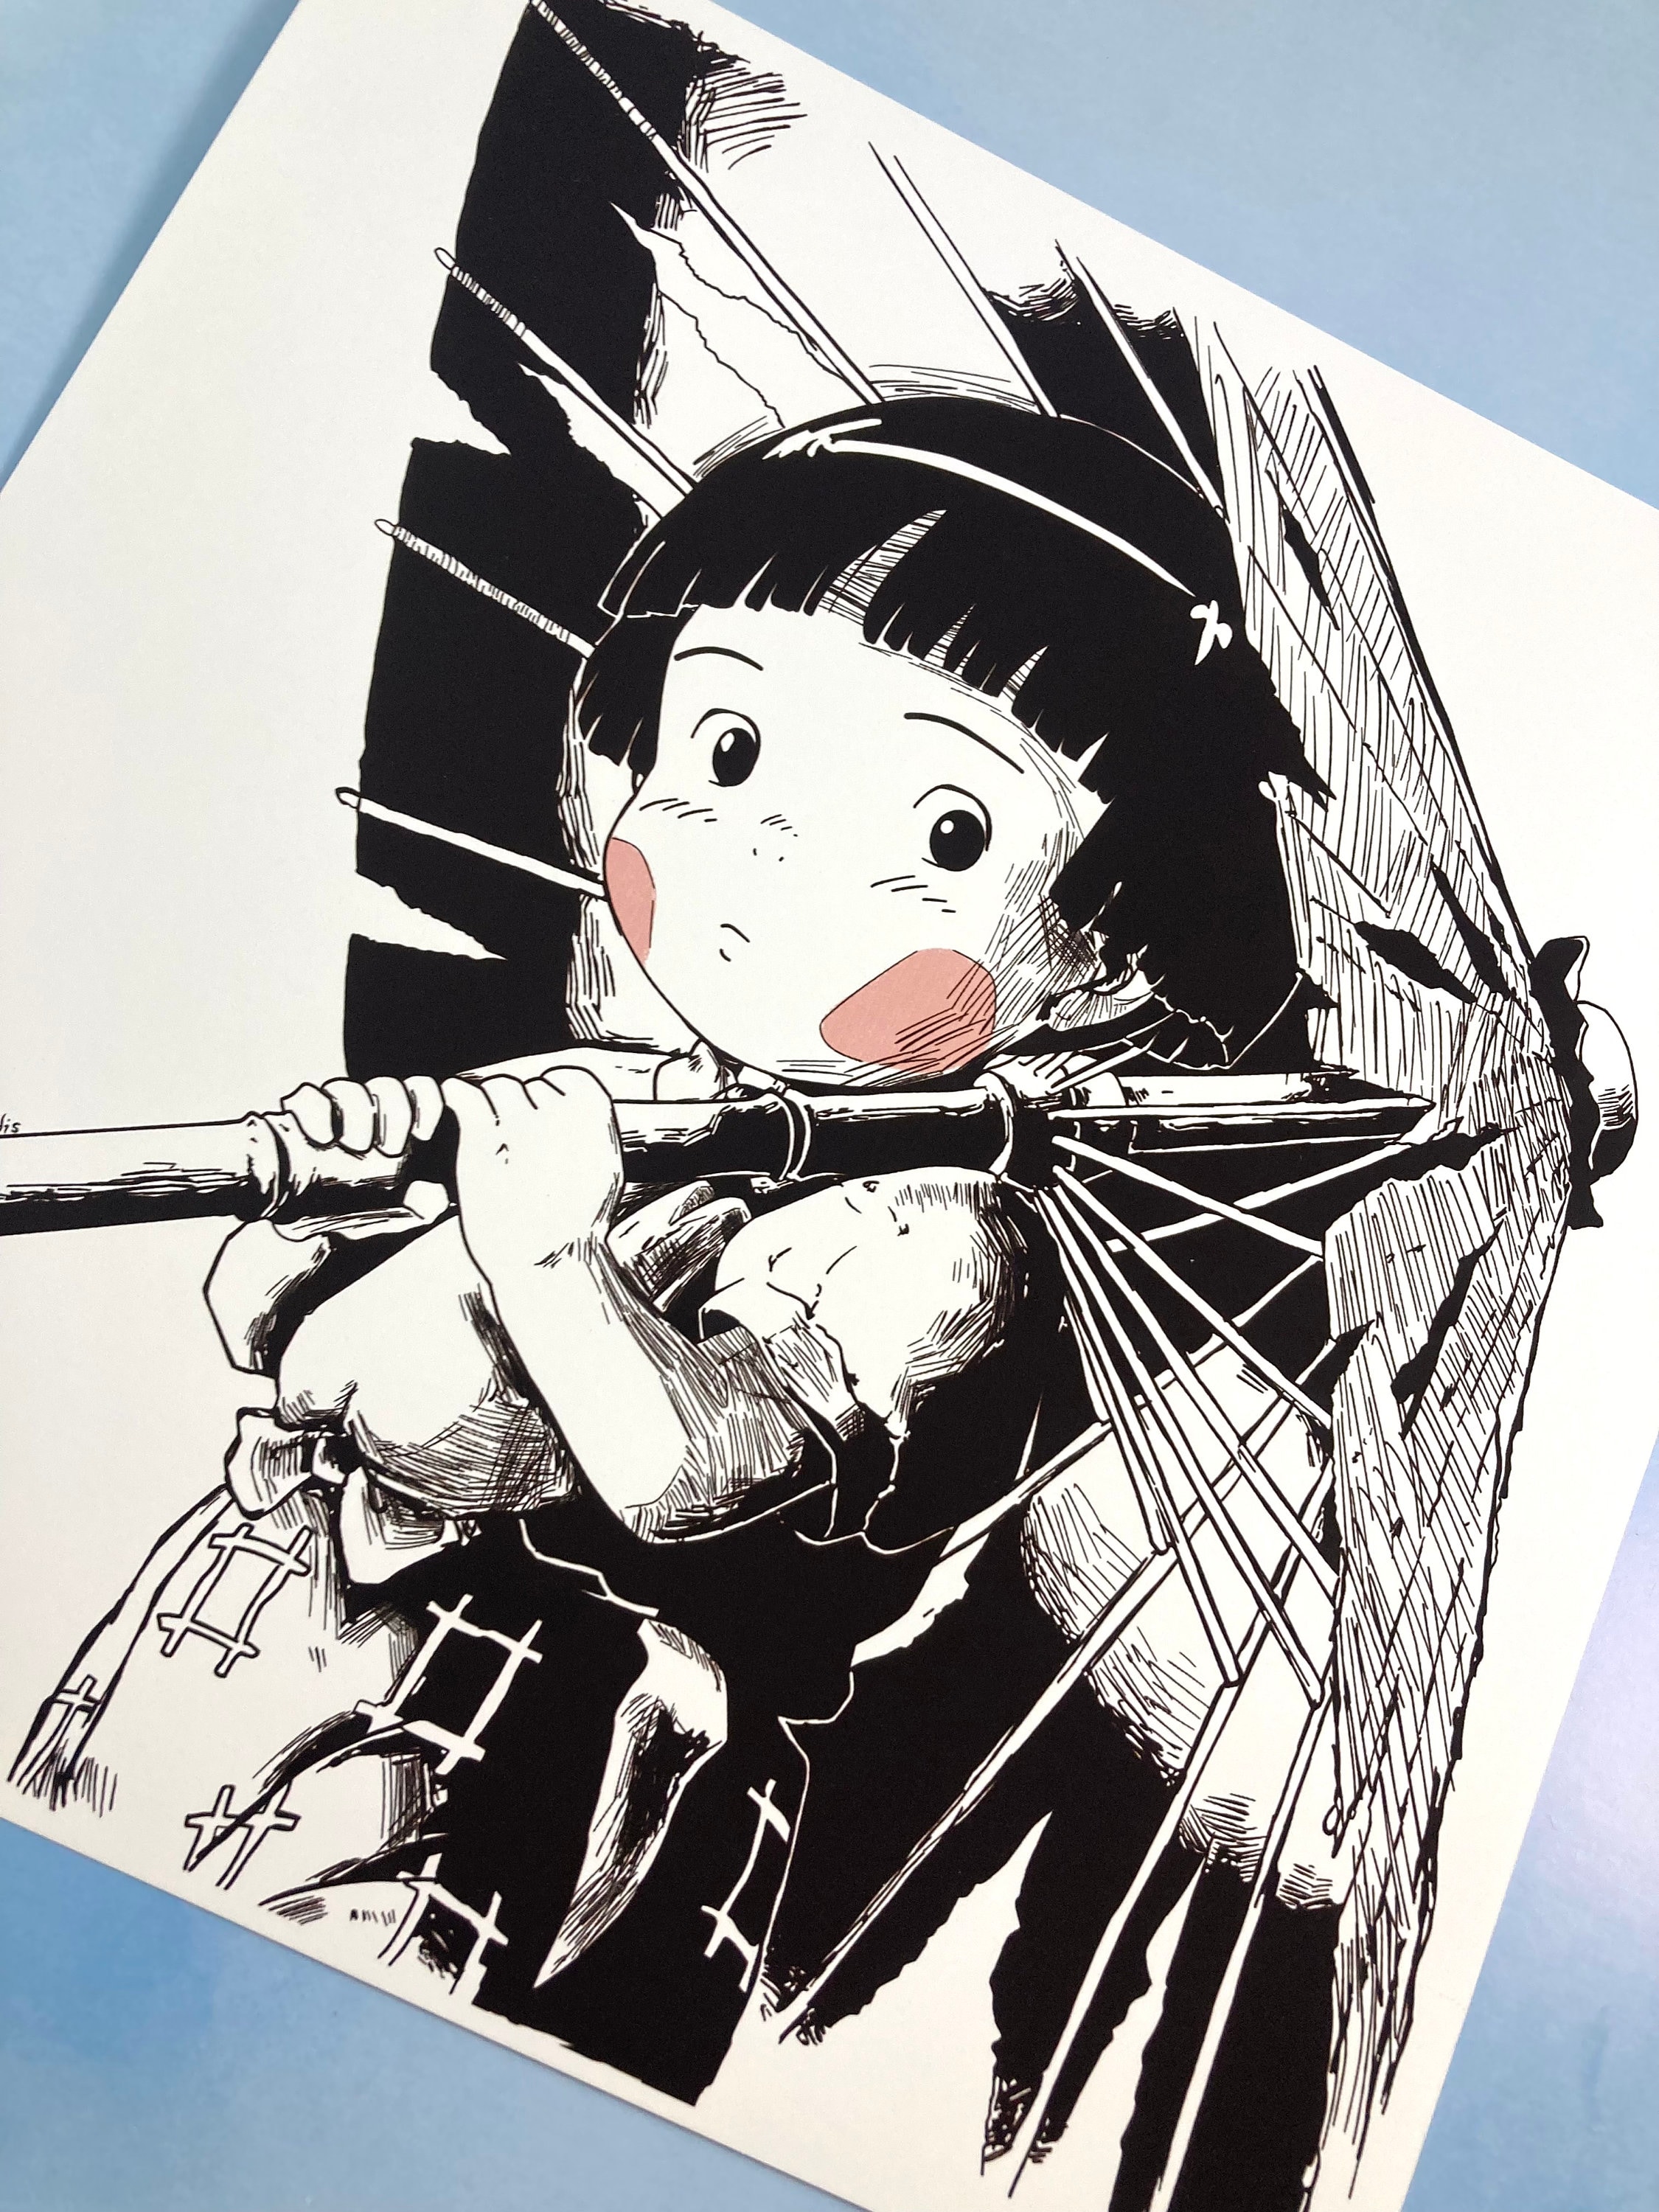 Grave of the Fireflies Digital Downloadable Printable Movie 